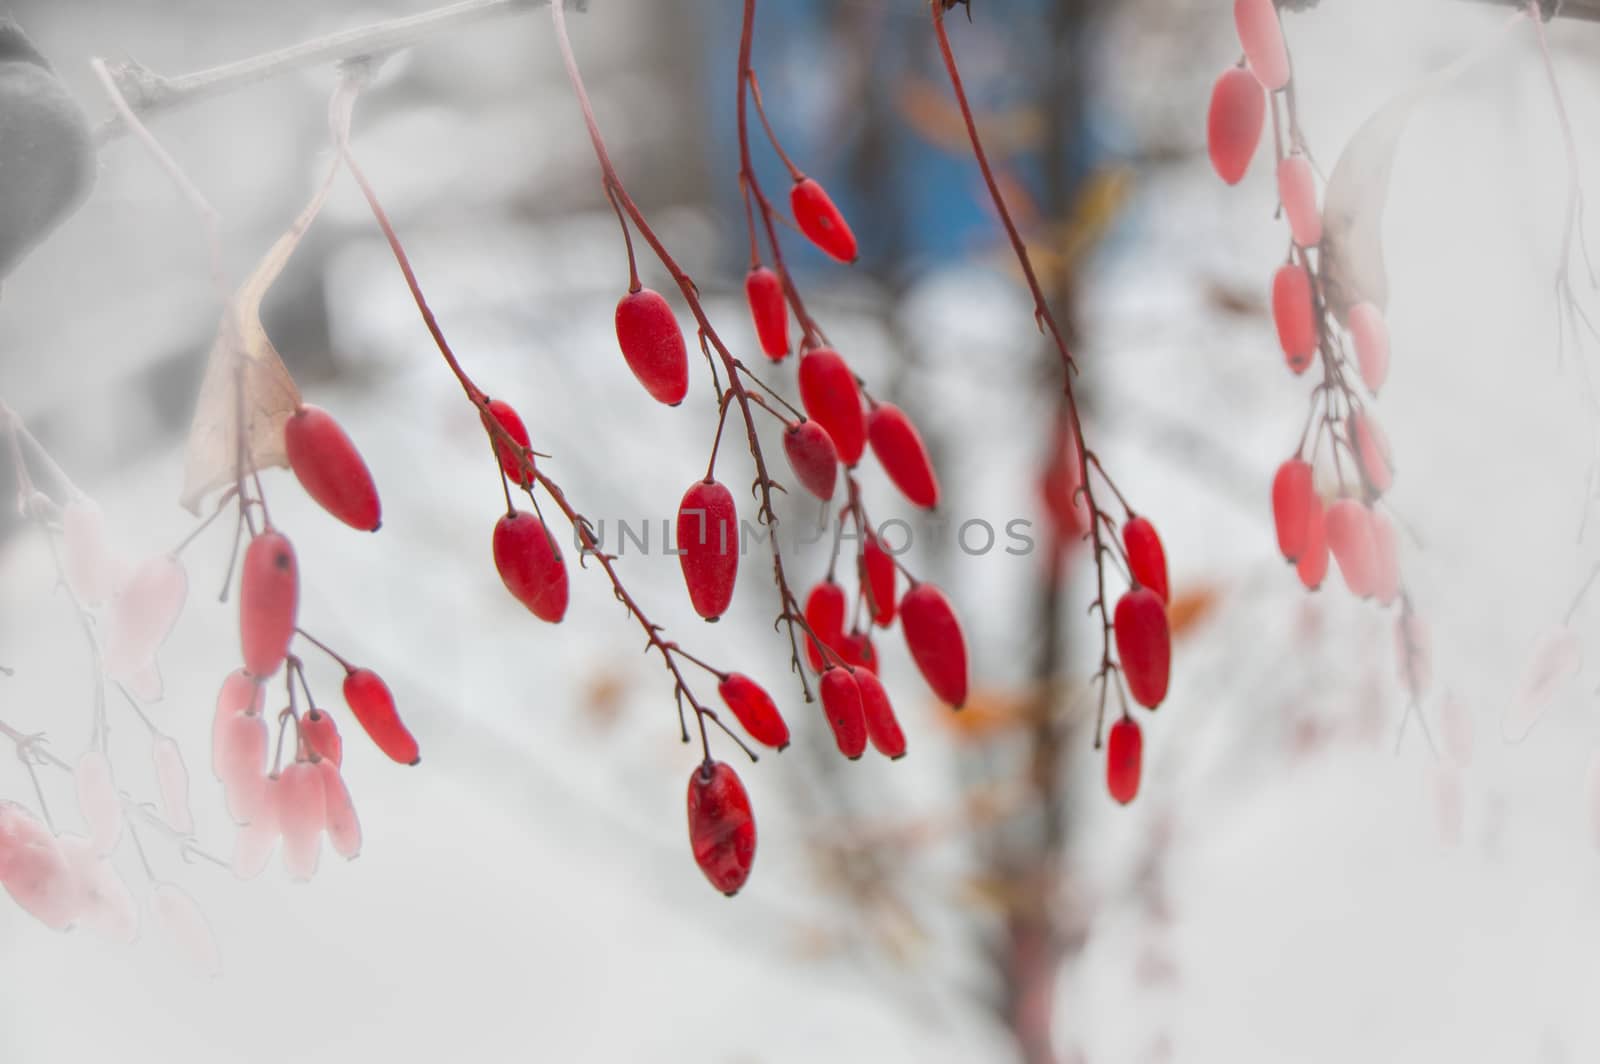 Red berries of barberry close-up selective focus on white background, vignetting effect.